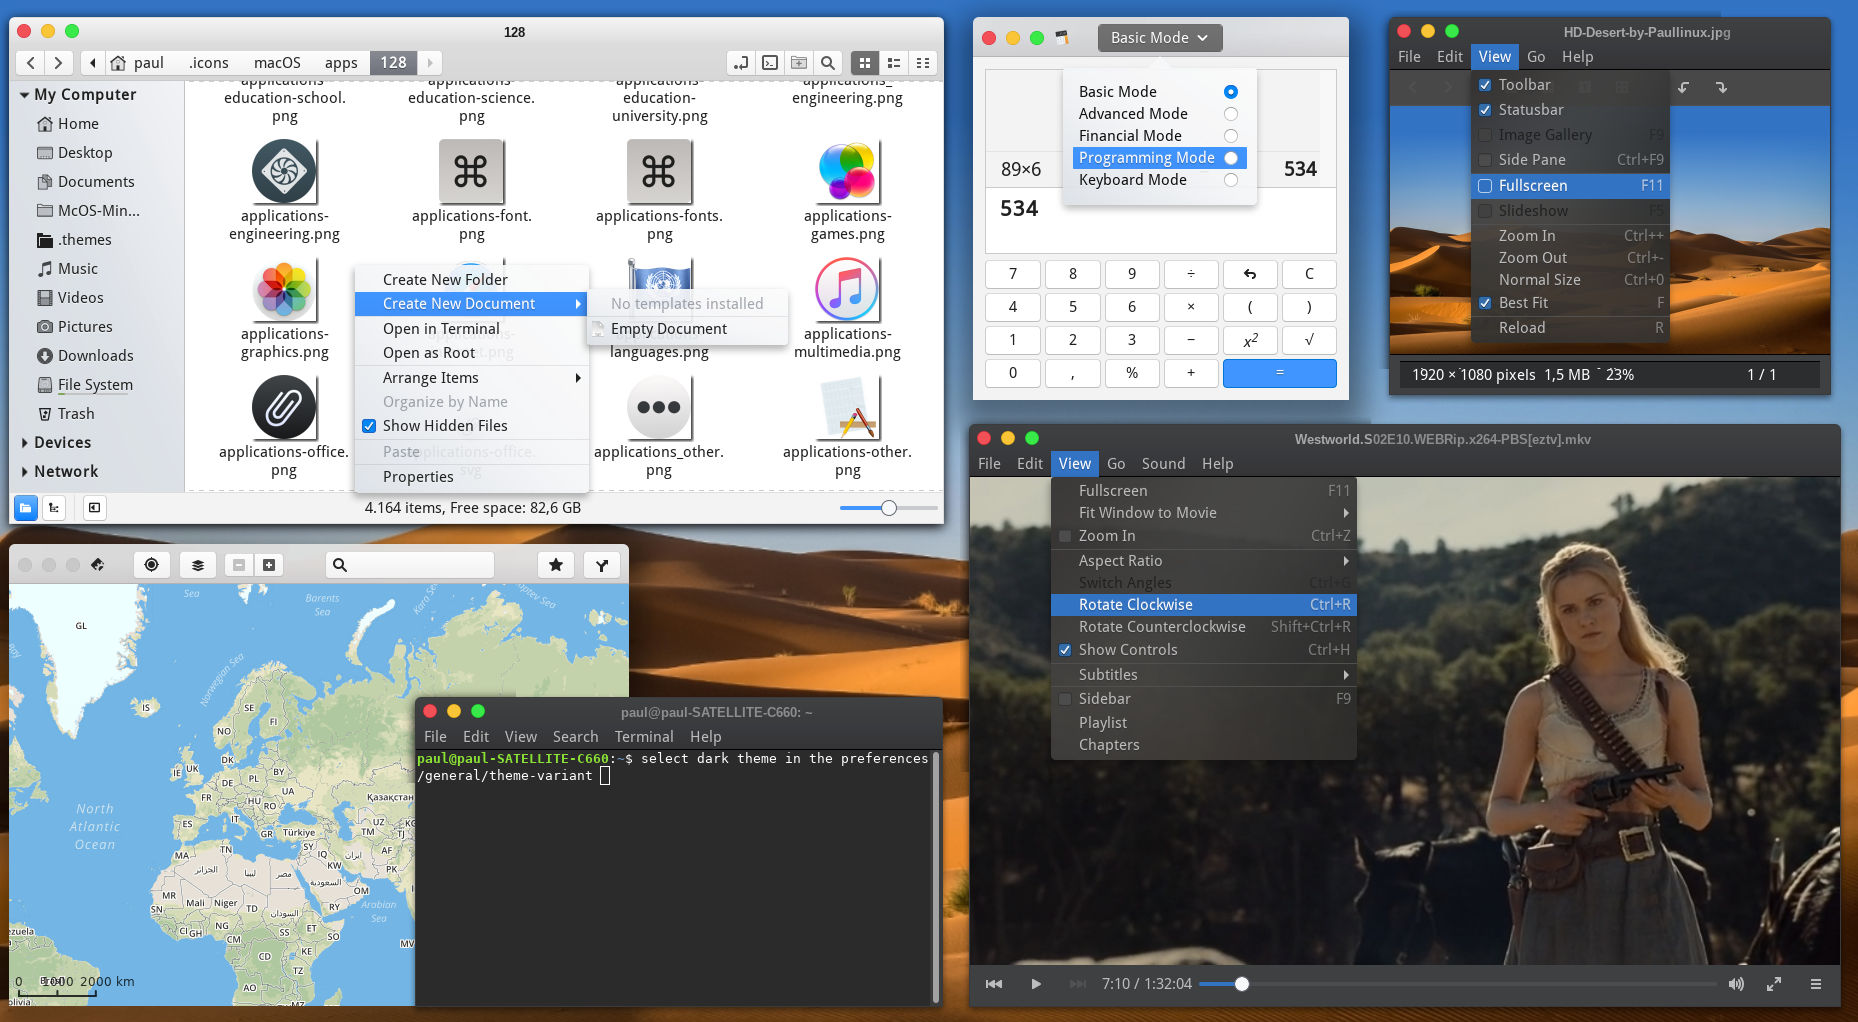 mac os style layout for windows 7